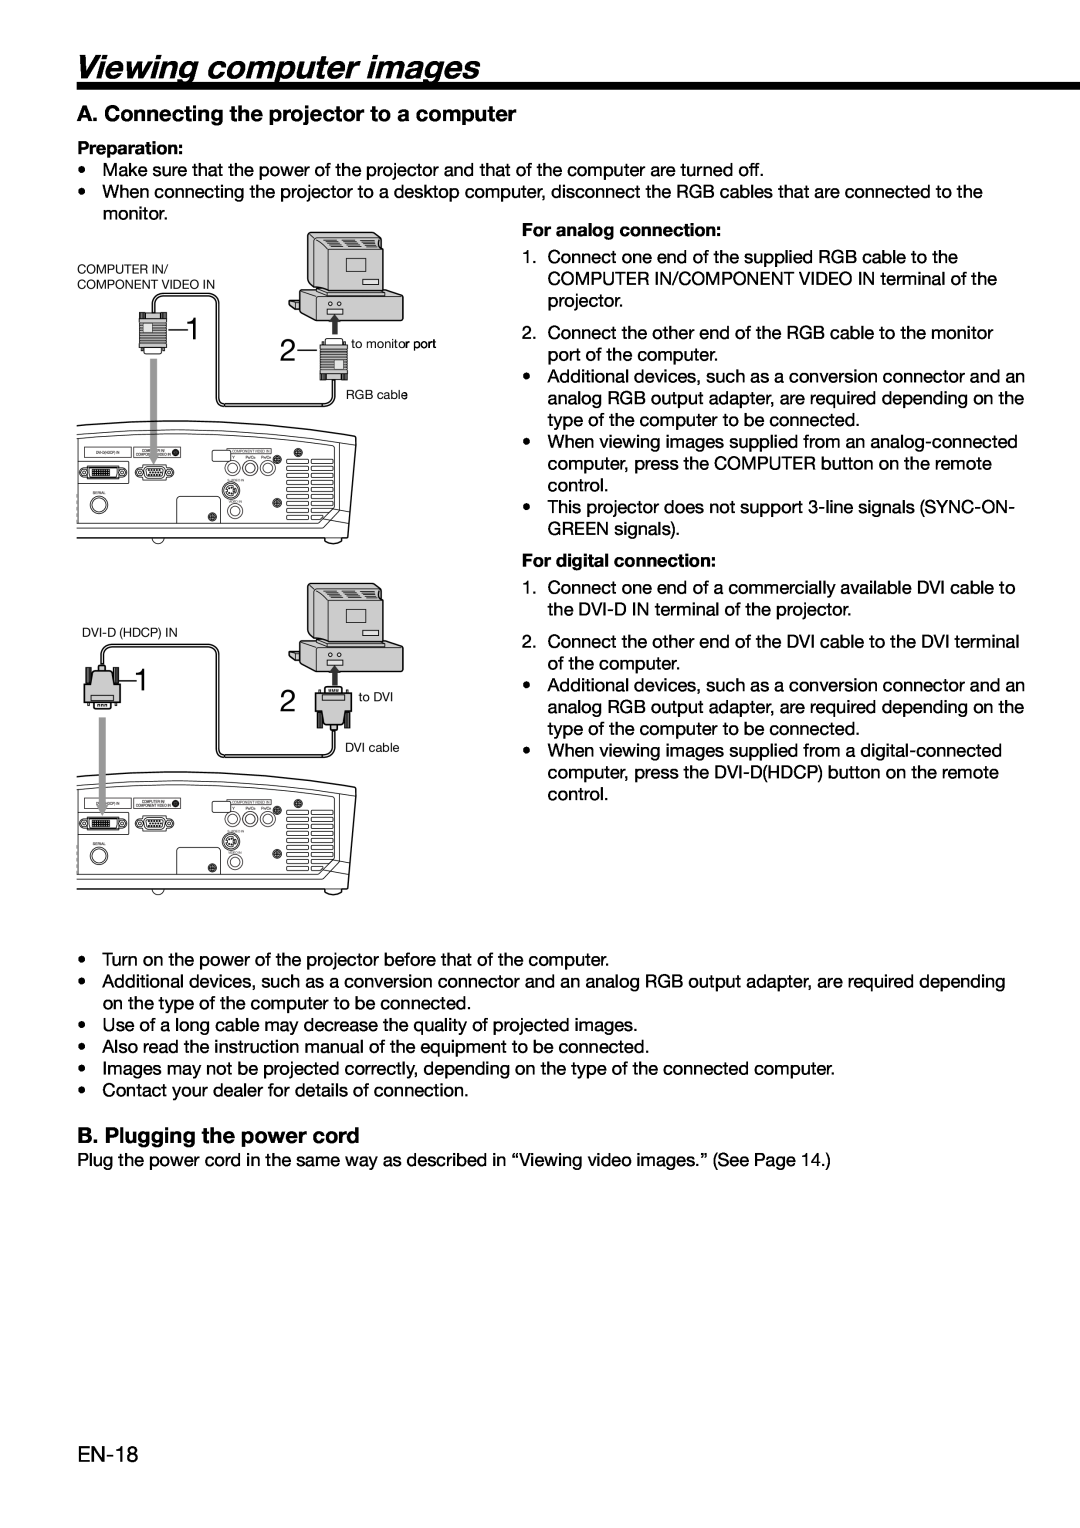 Mitsubishi Electronics HC910 user manual Viewing computer images, A. Connecting the projector to a computer, Preparation 